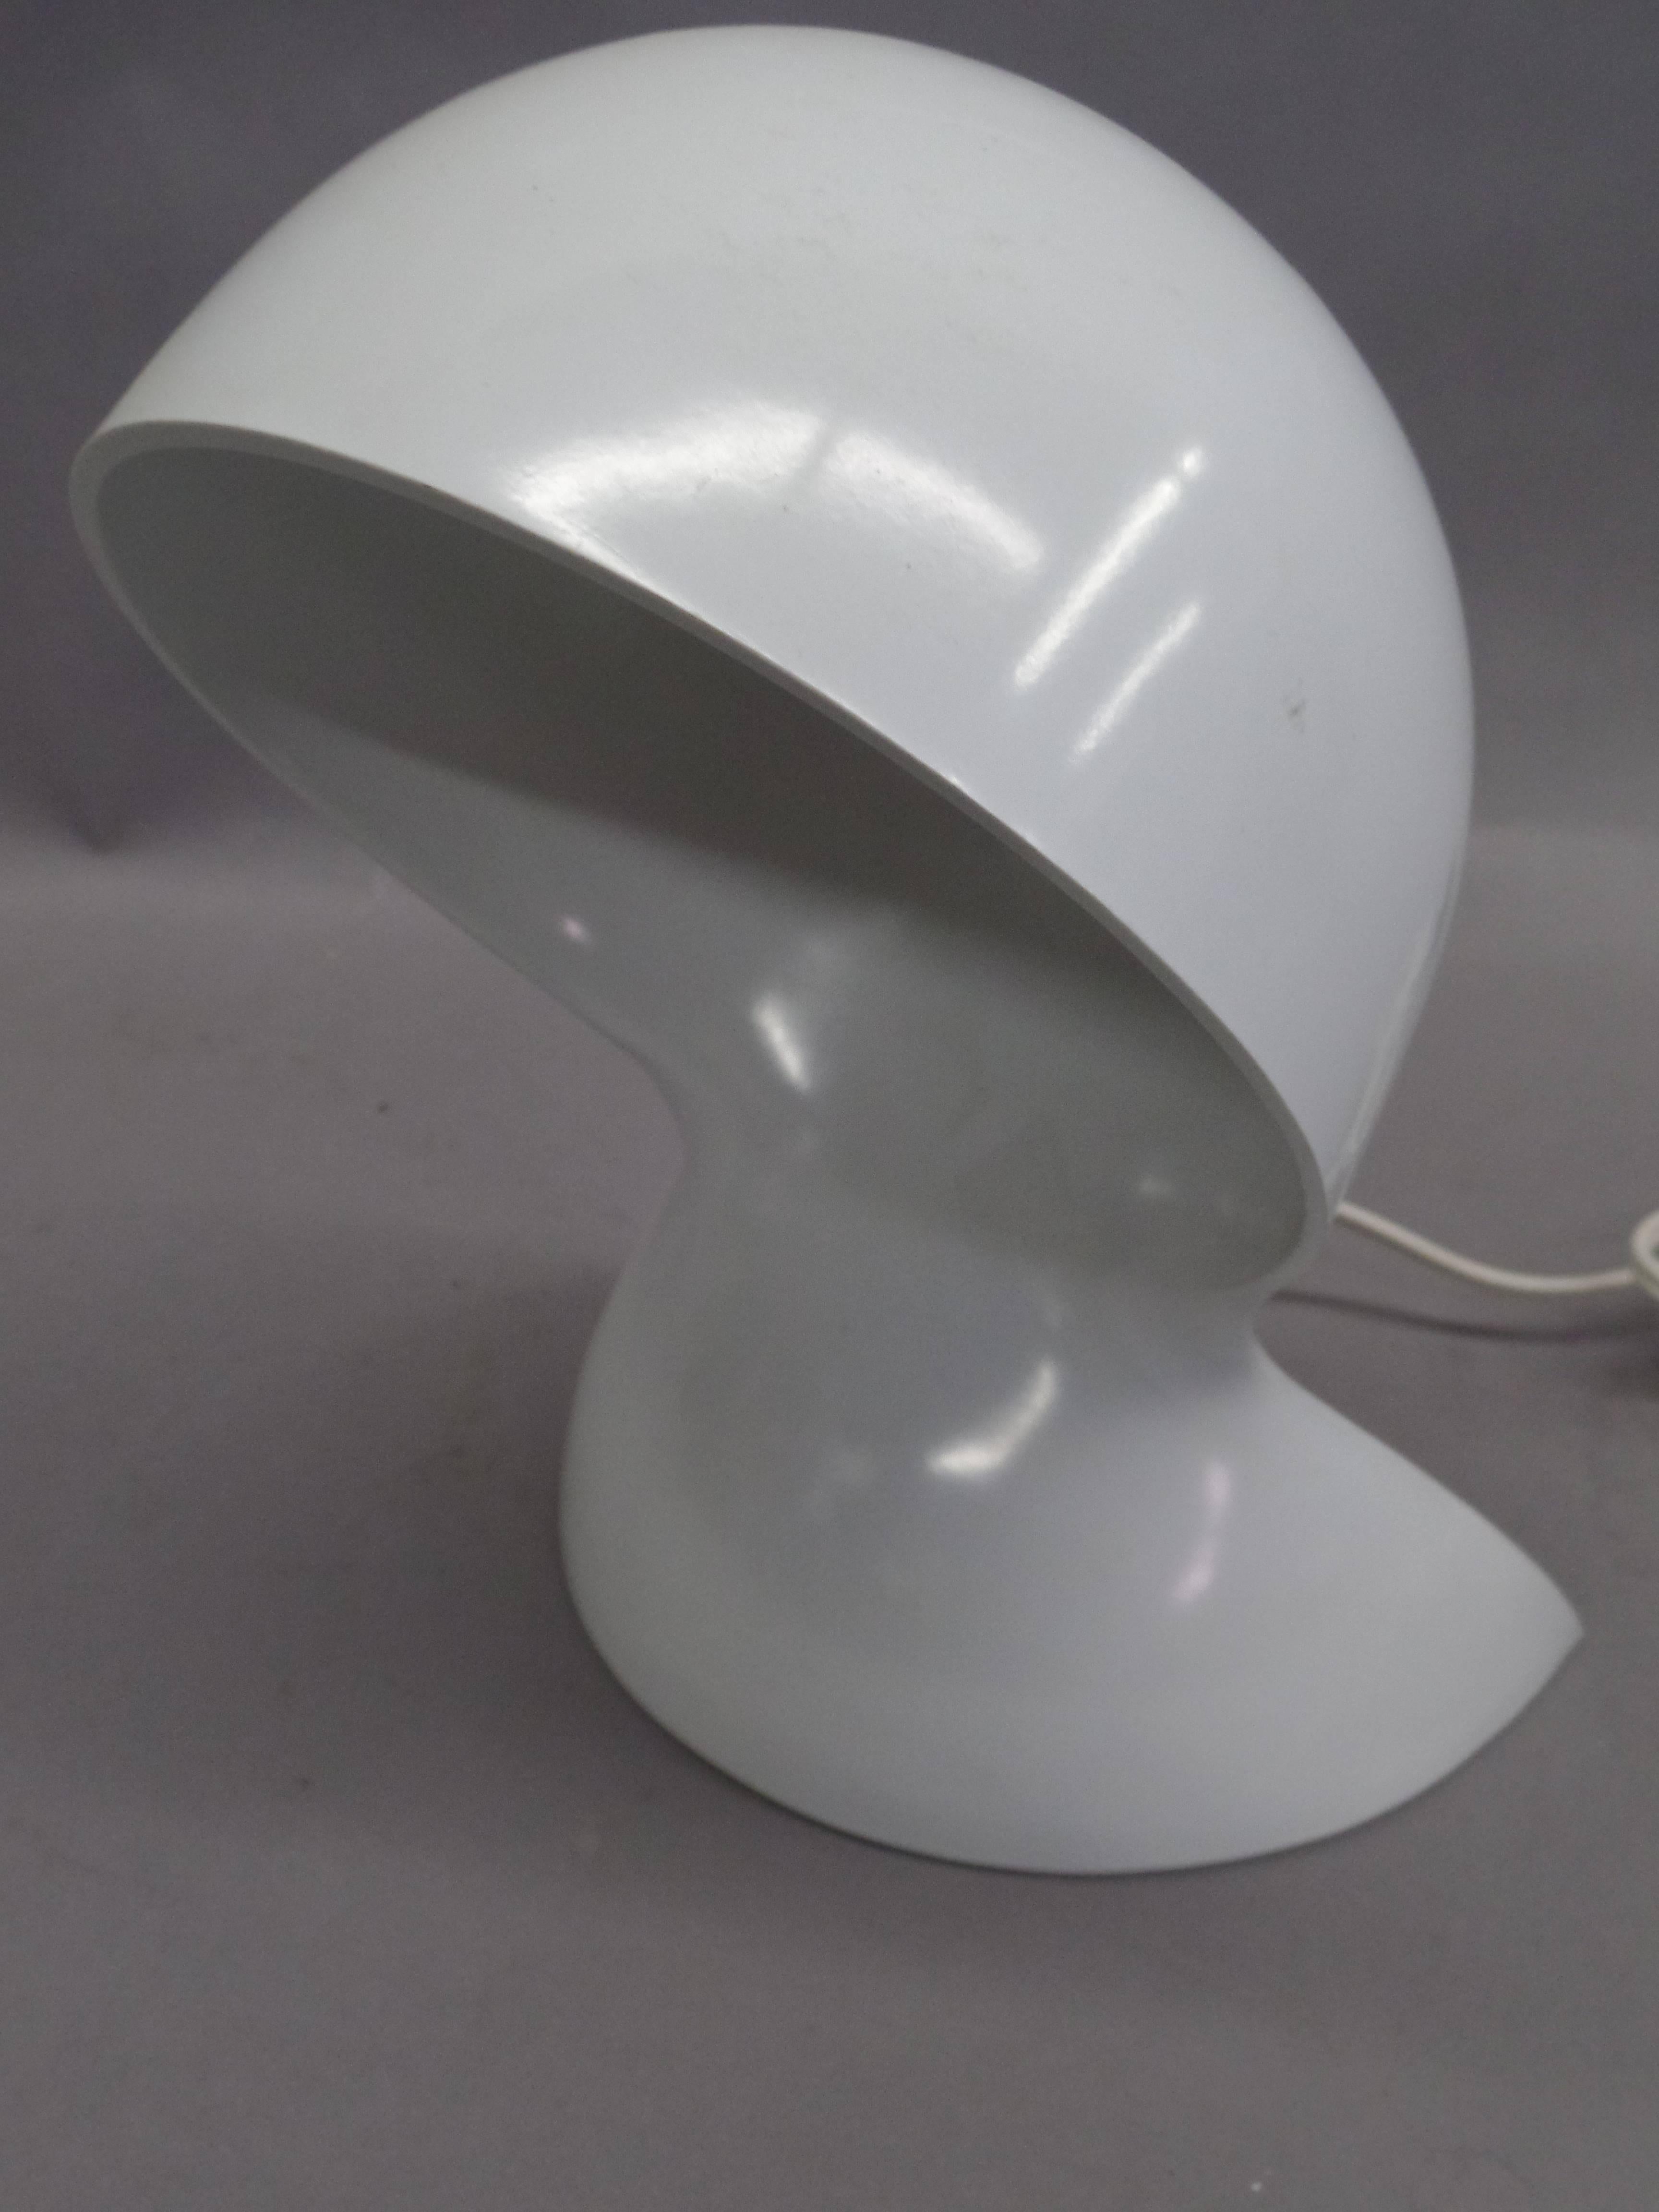 Rare Italian Mid-Century Modern, Space Age, table lamp by Vico Magistretti for Artemide. One bulb.
    
   